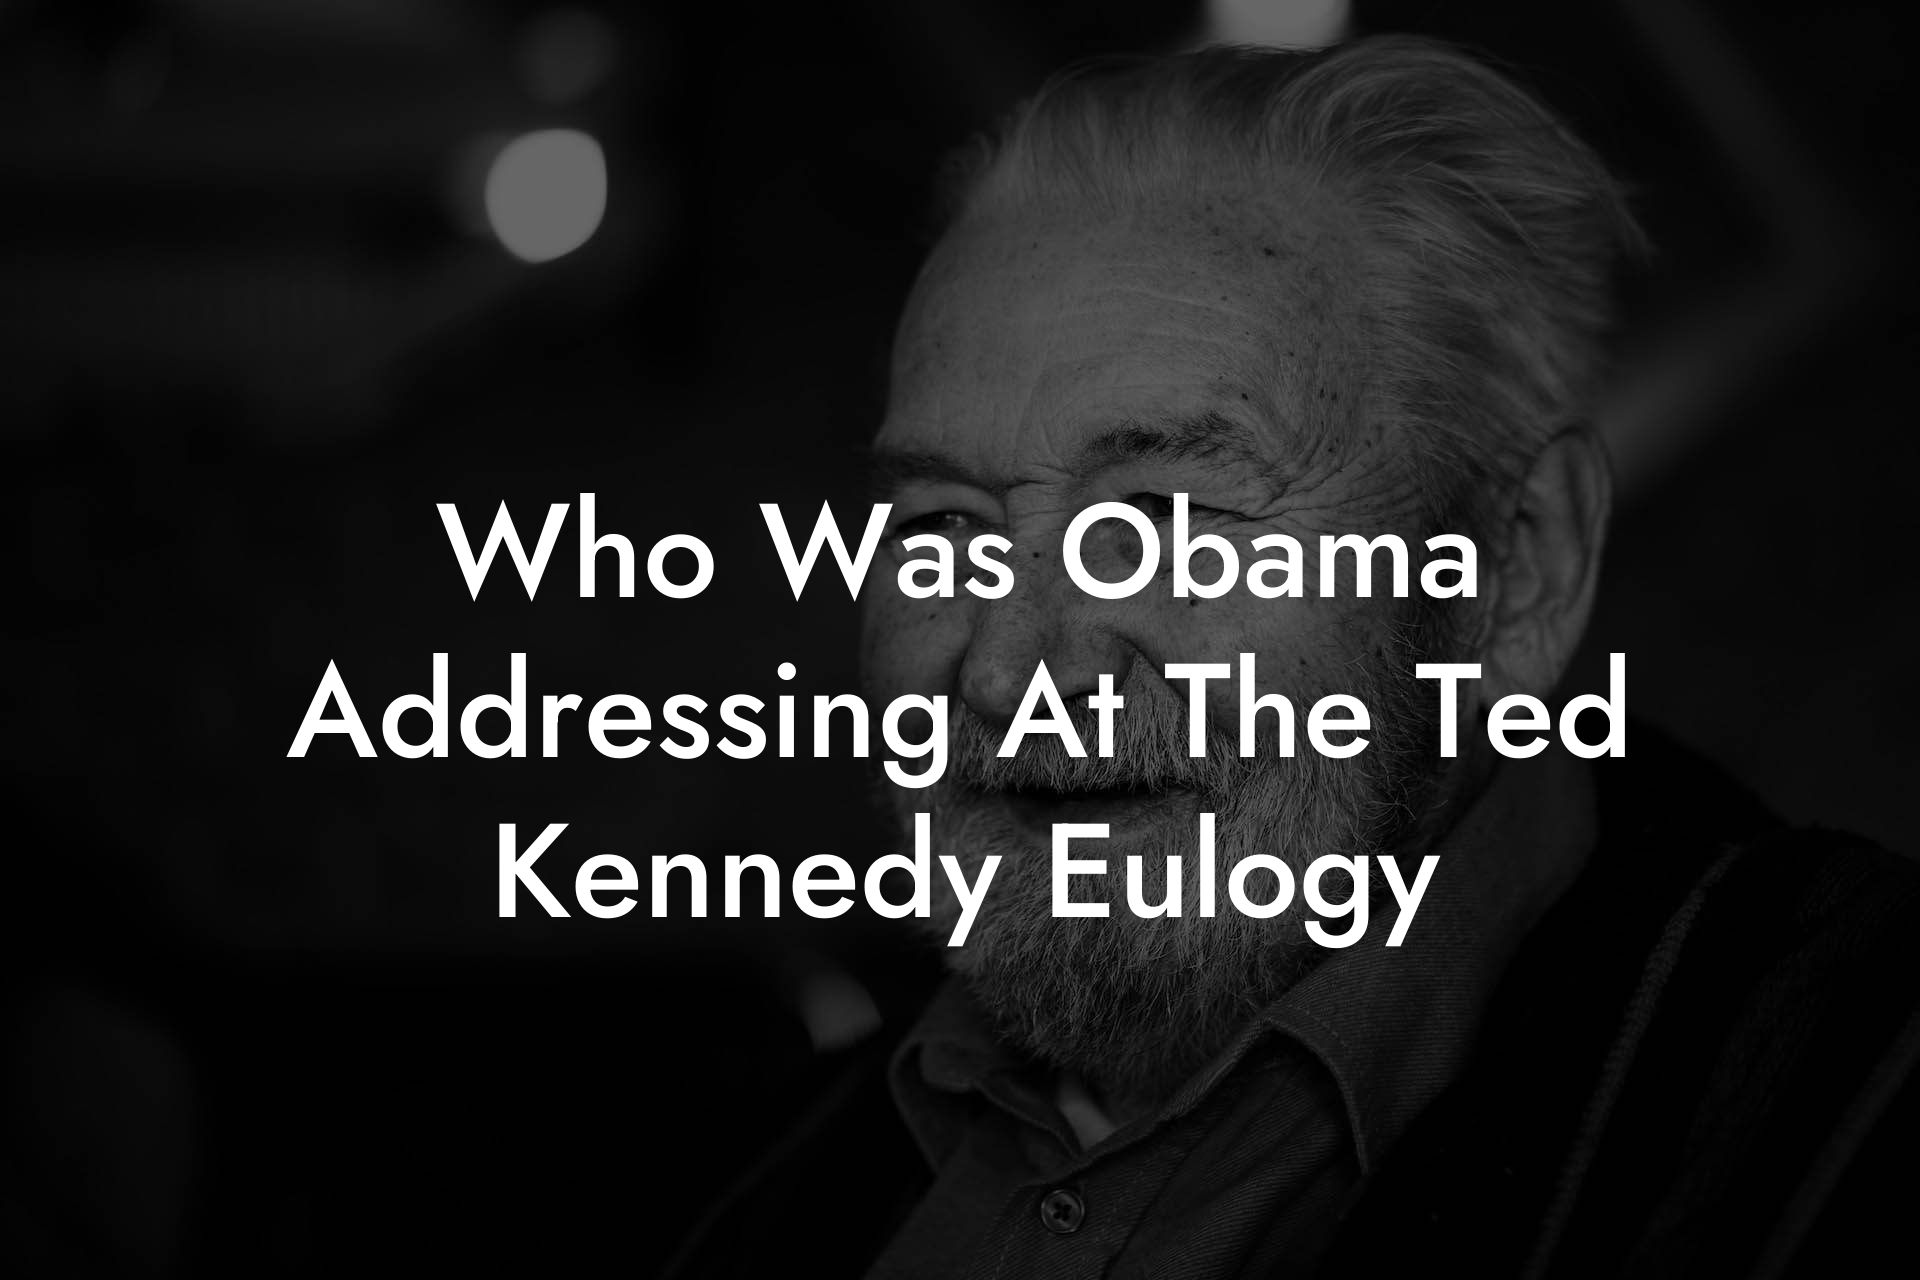 Who Was Obama Addressing At The Ted Kennedy Eulogy